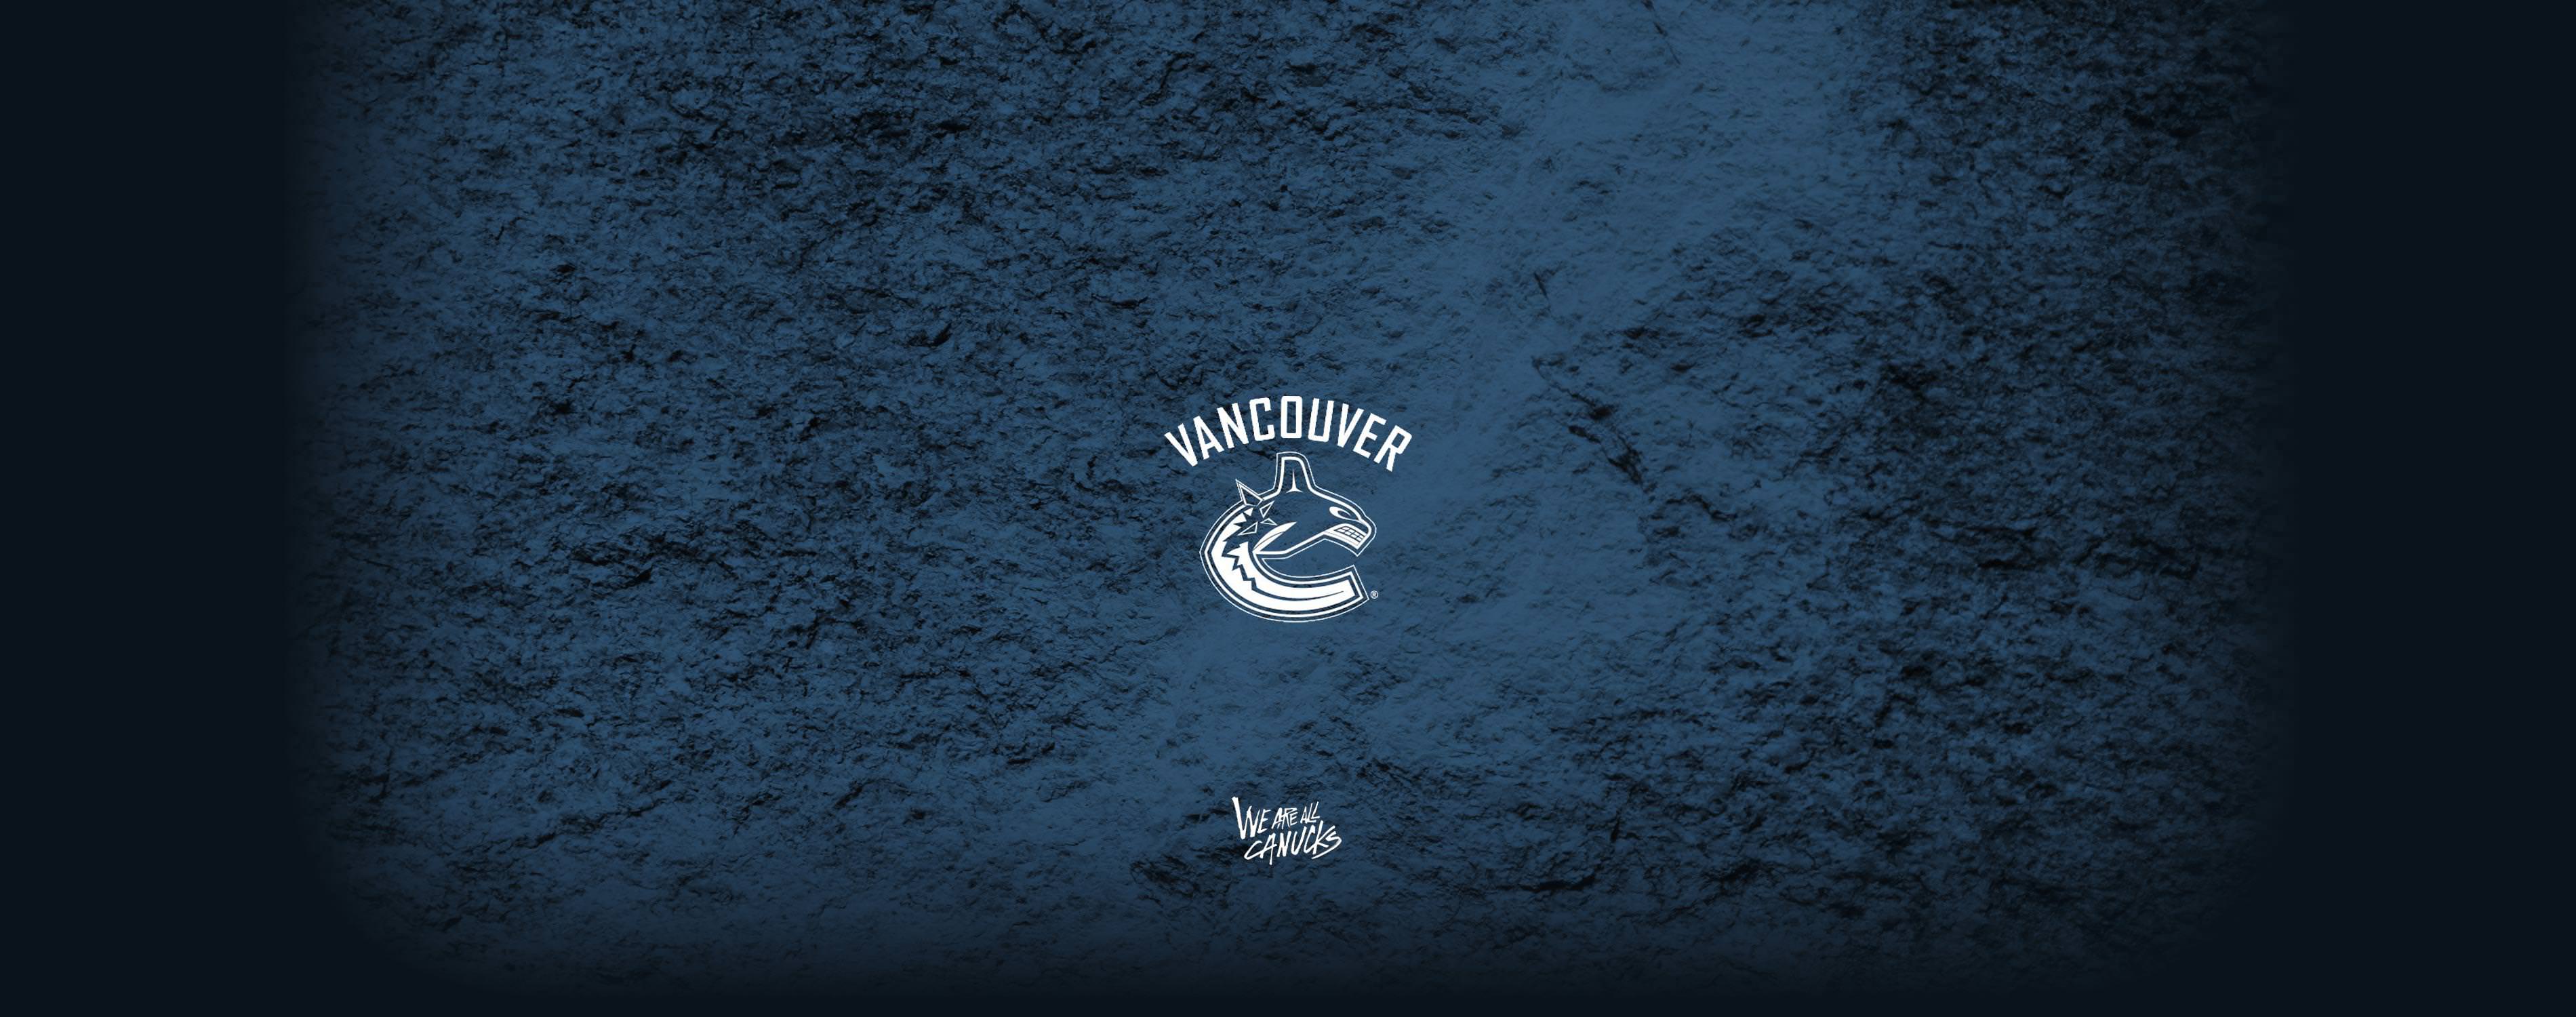 A simple Canucks wallpaper I made in the theme of the current 'We